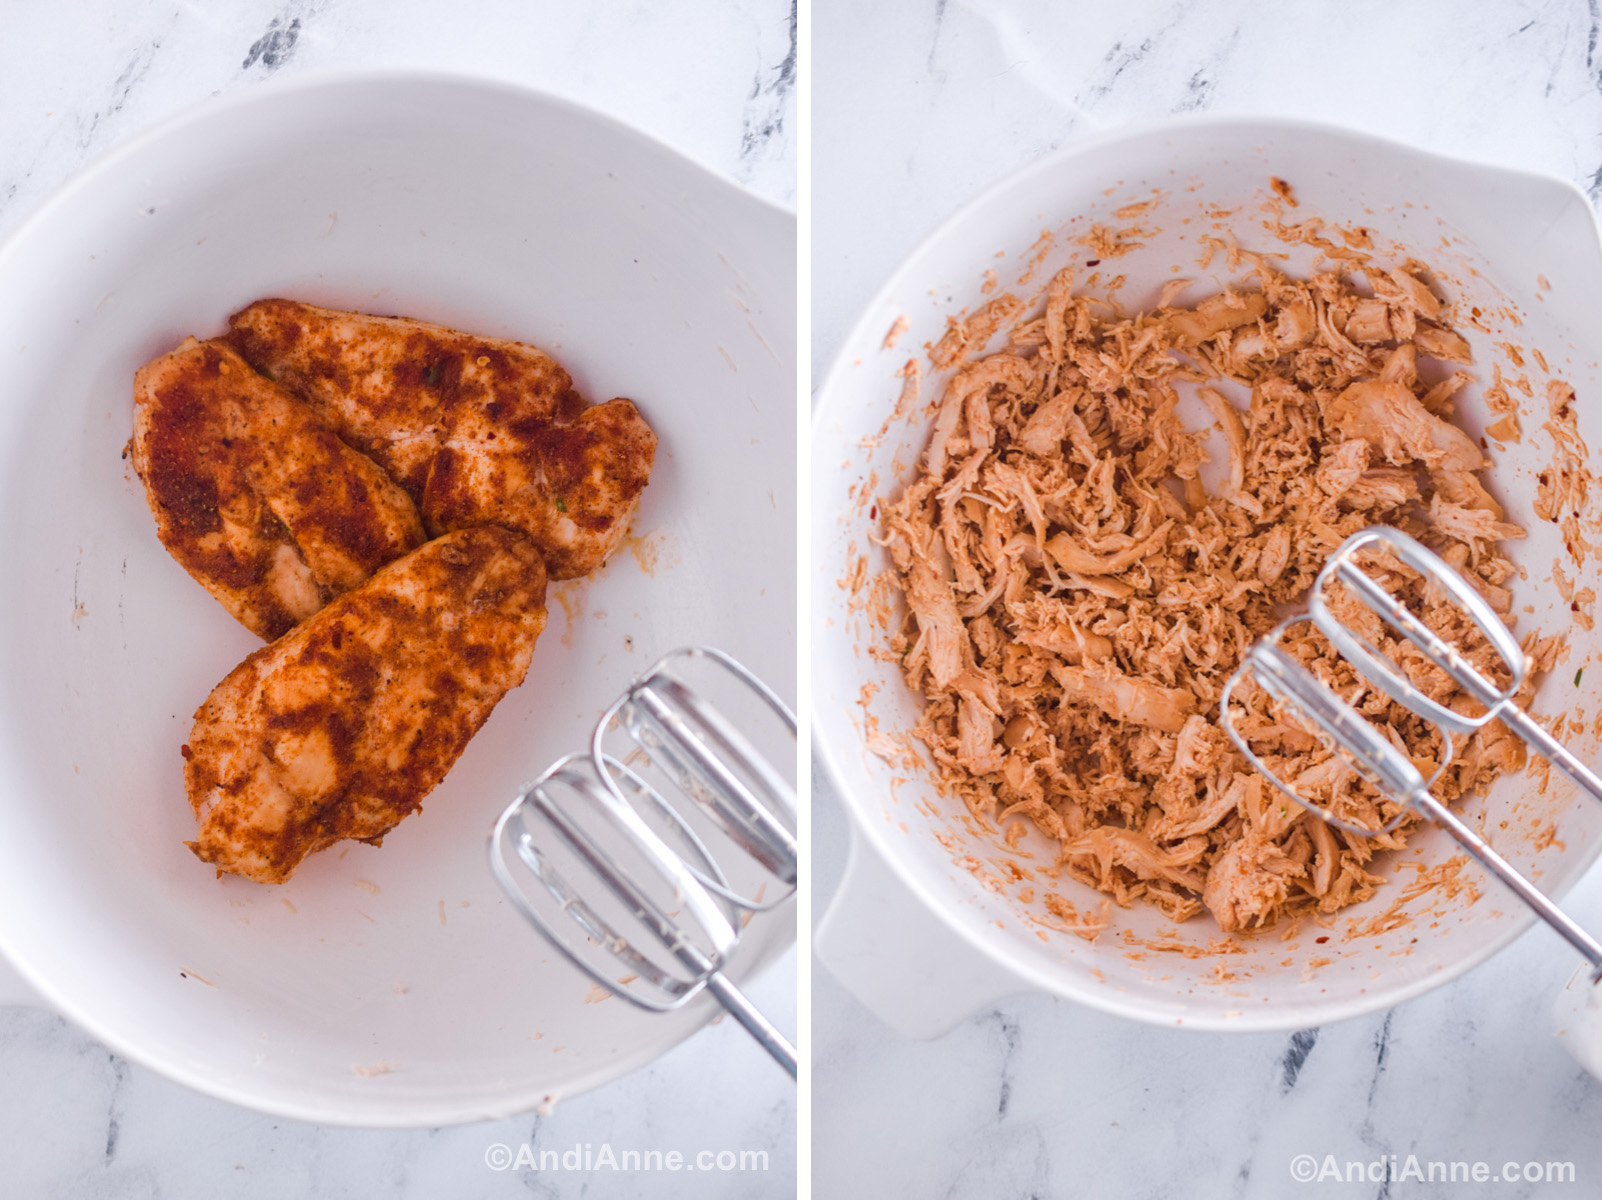 Two images. First is a bowl with three cooked chicken breasts. Second is the same bowl with shredded chicken  and an electric mixer.